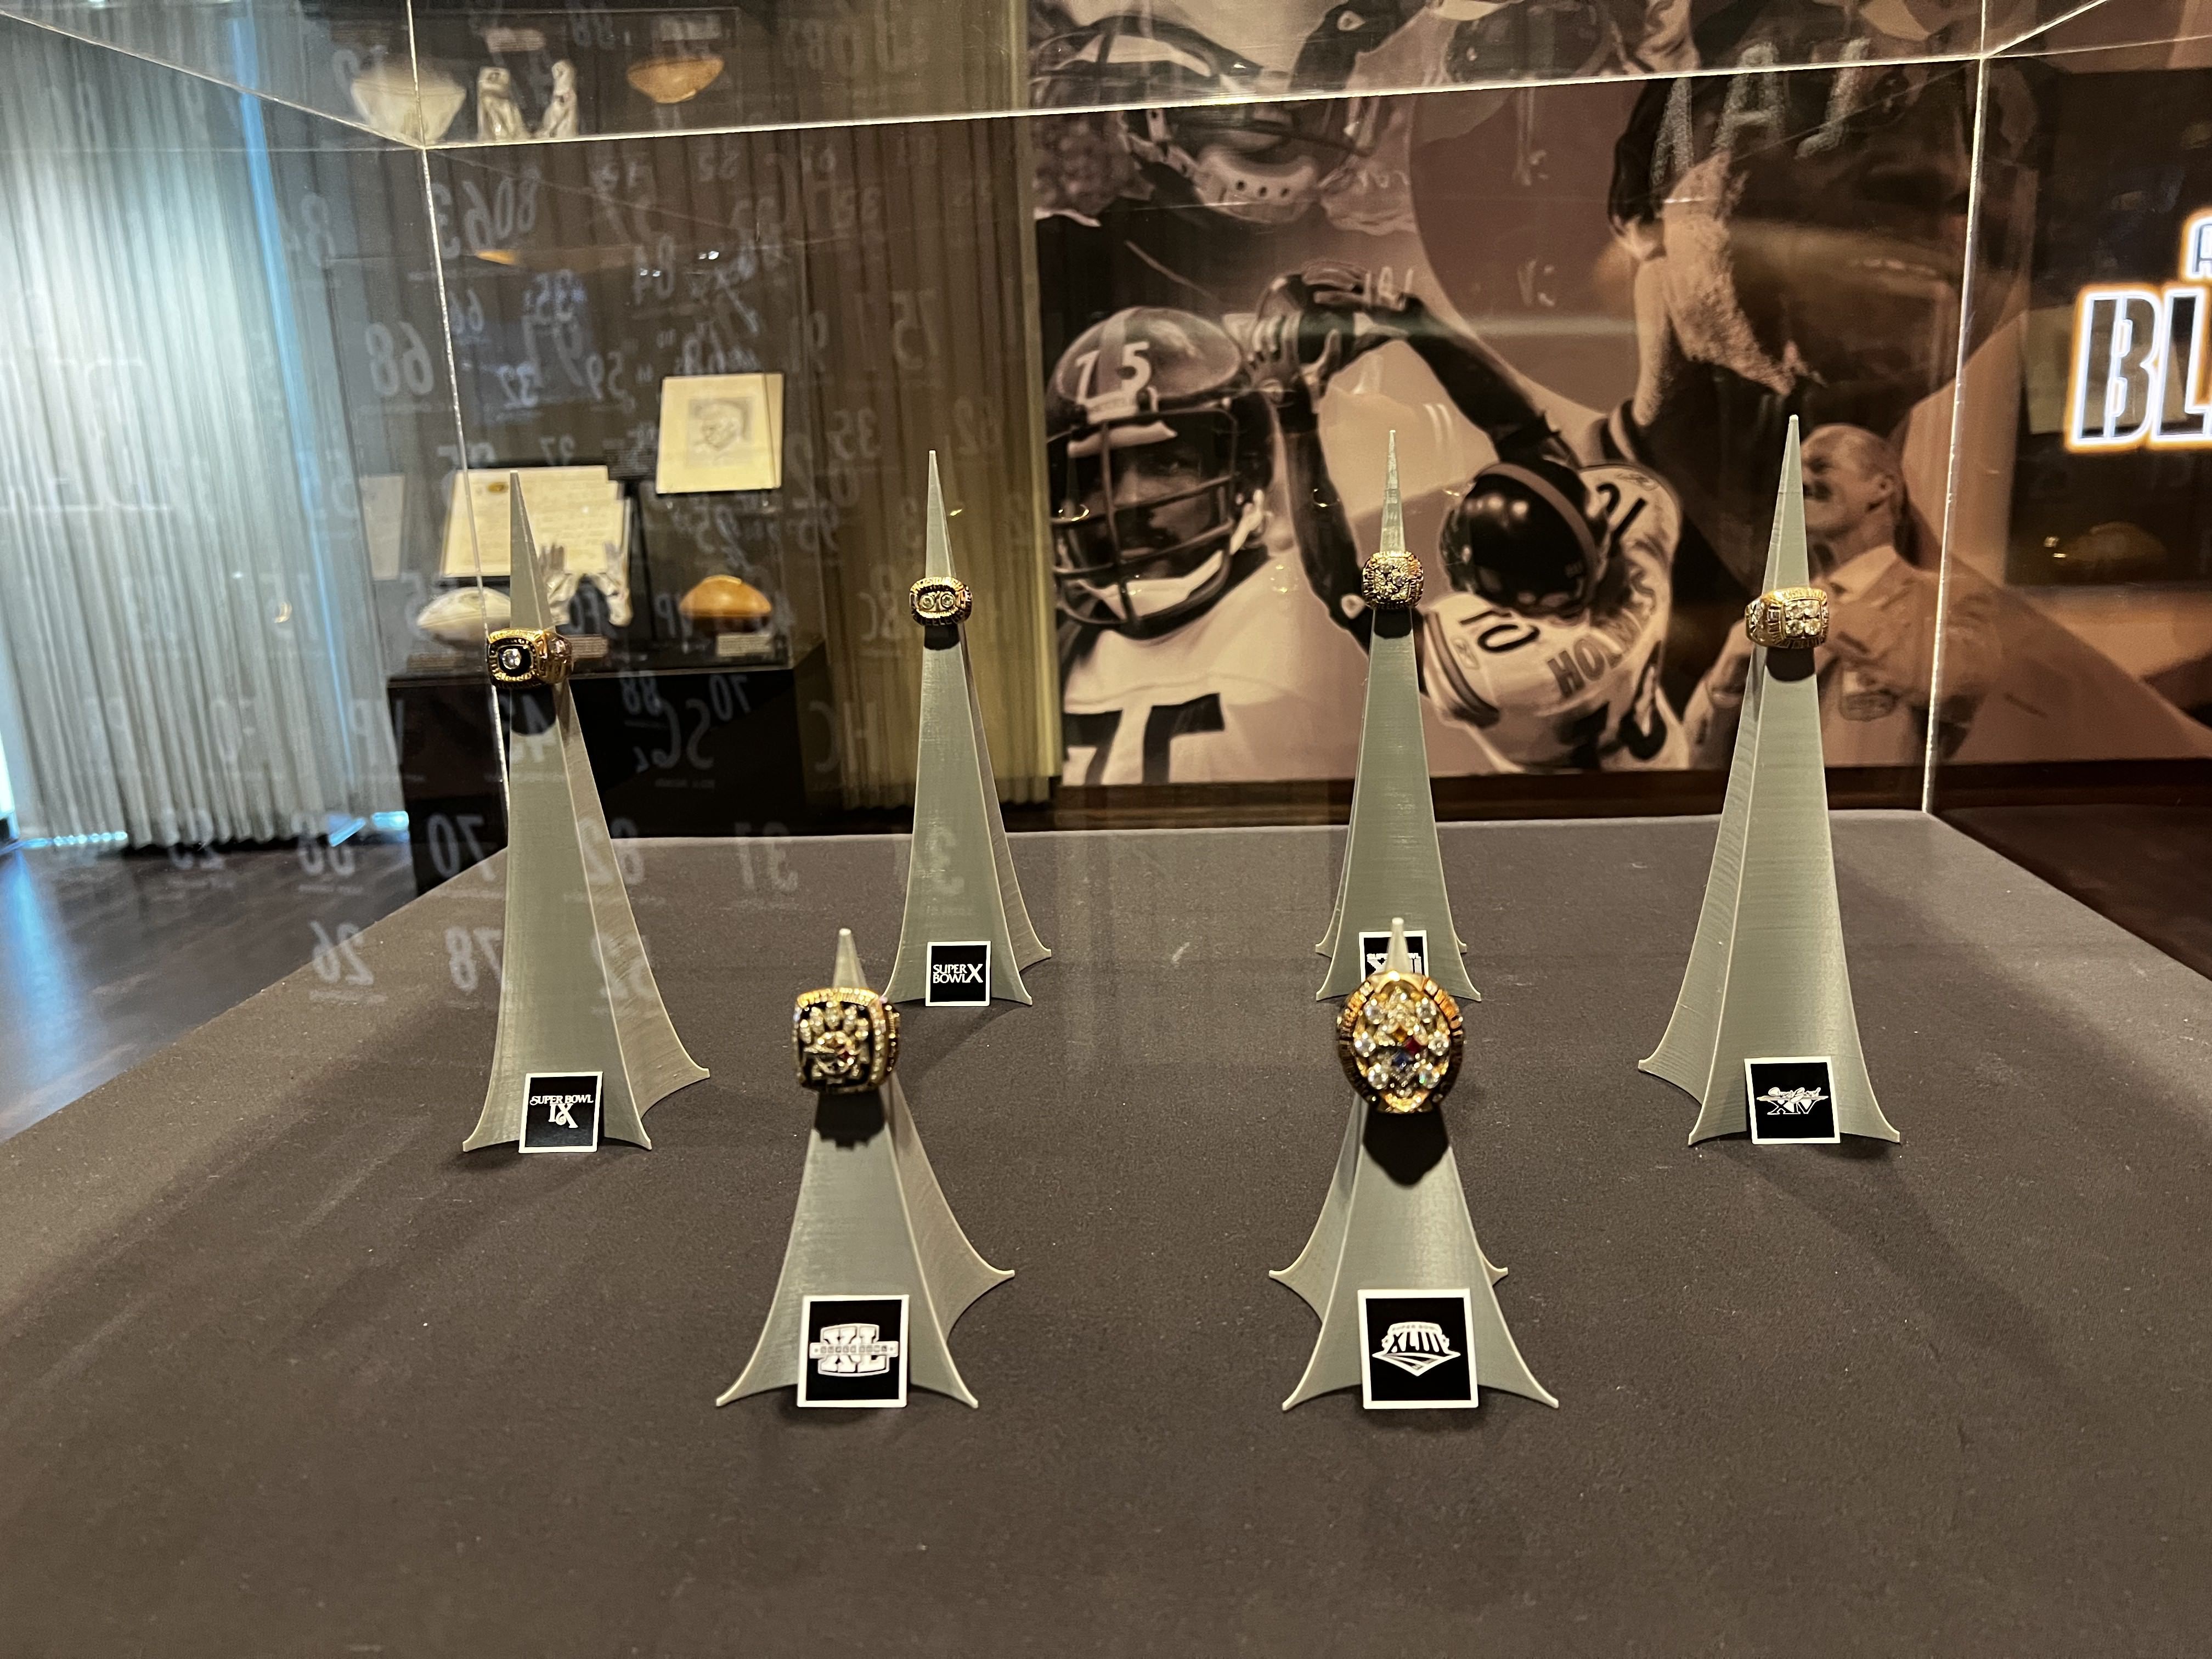 Super Bowl rings at Steelers hall of fam exhibit.